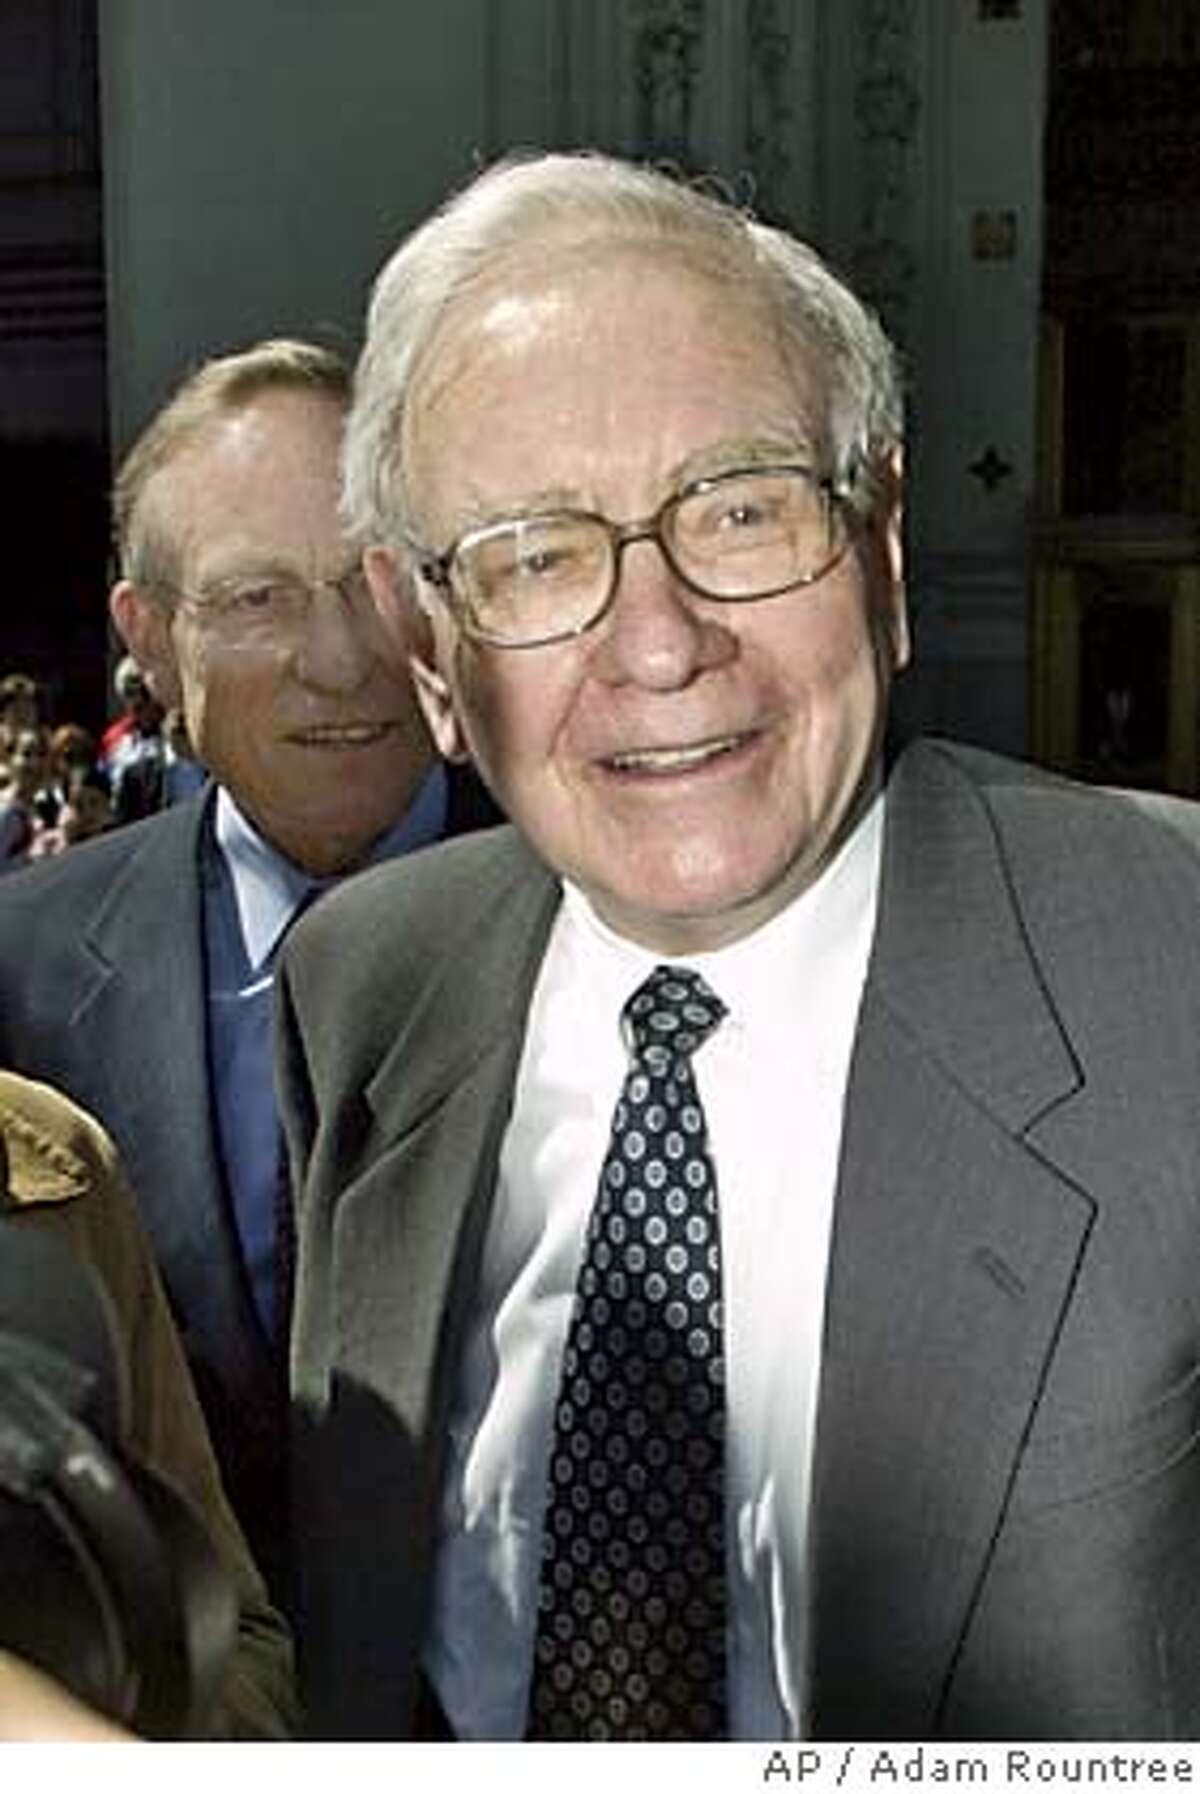 Billionaire investor Warren Buffett, right, leaves a meeting with the Securities and Exchange Commission in New York, Monday afternoon April 11, 2005. (AP Photo/Adam Rountree)